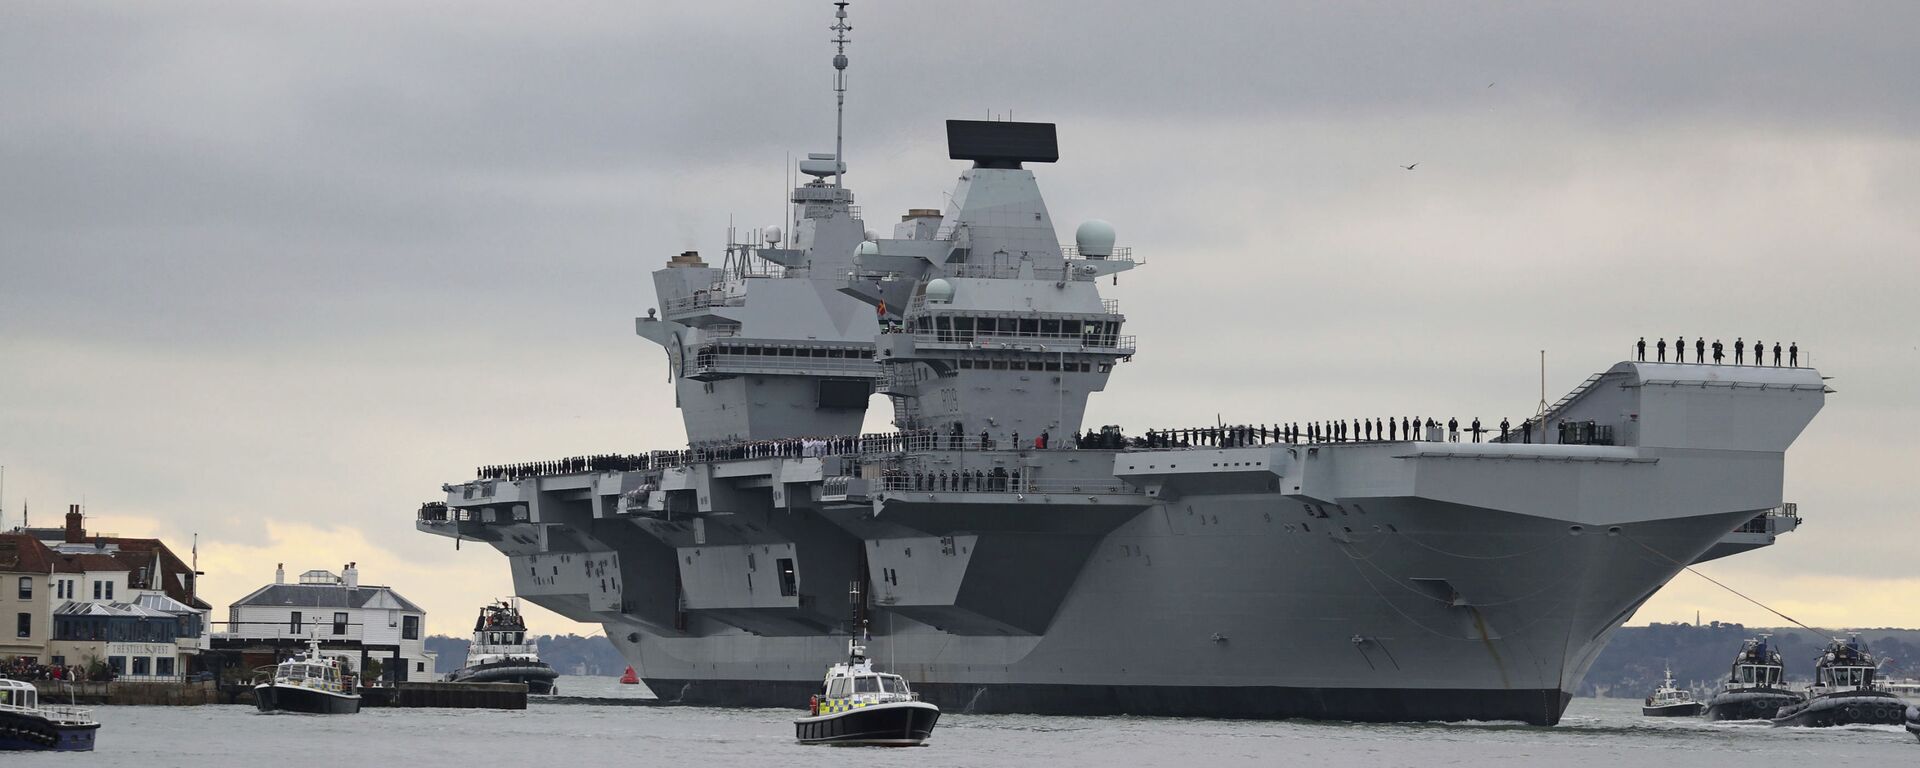 The new British aircraft carrier HMS Prince of Wales arrives at Portsmouth Naval Base after its first sea trials, in Portsmouth, southern England, 16 November 2019 - Sputnik International, 1920, 08.12.2020